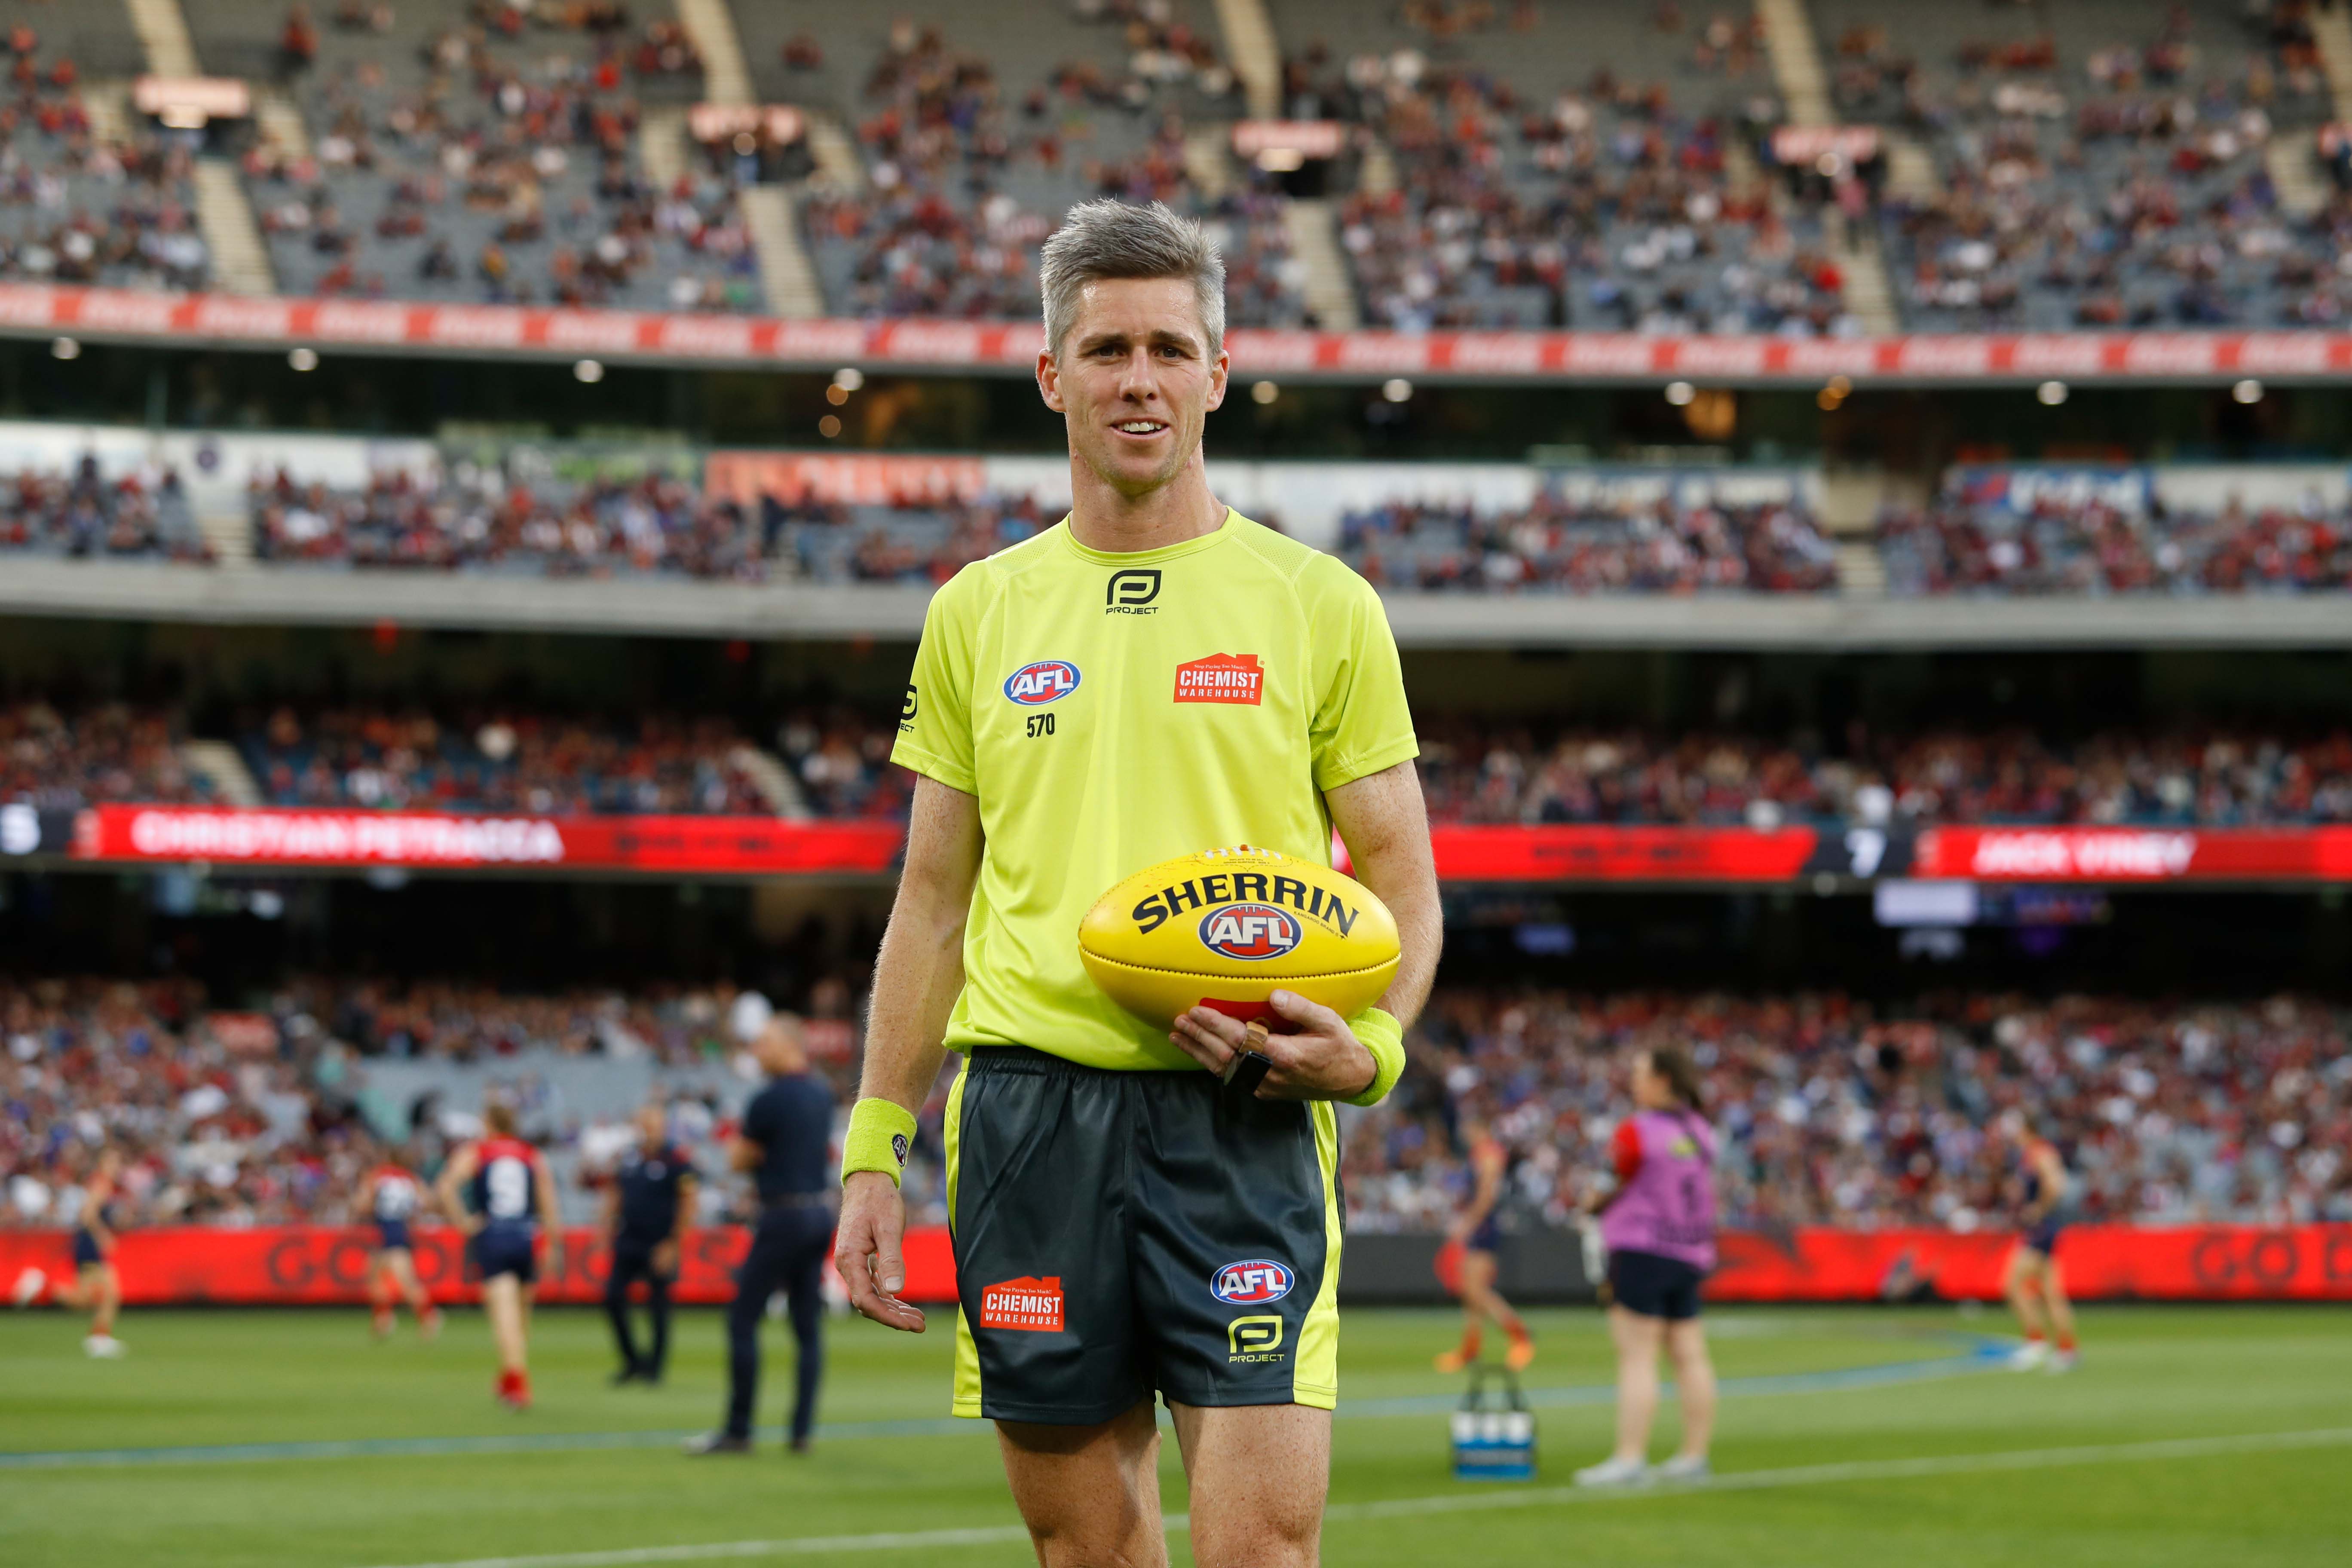 MELBOURNE, AUSTRALIA - MARCH 16: during the 2022 AFL Round 01 match between the Melbourne Demons and the Western Bulldogs at the Melbourne Cricket Ground on March 16, 2022 In Melbourne, Australia. (Photo by Dylan Burns/AFL Photos)